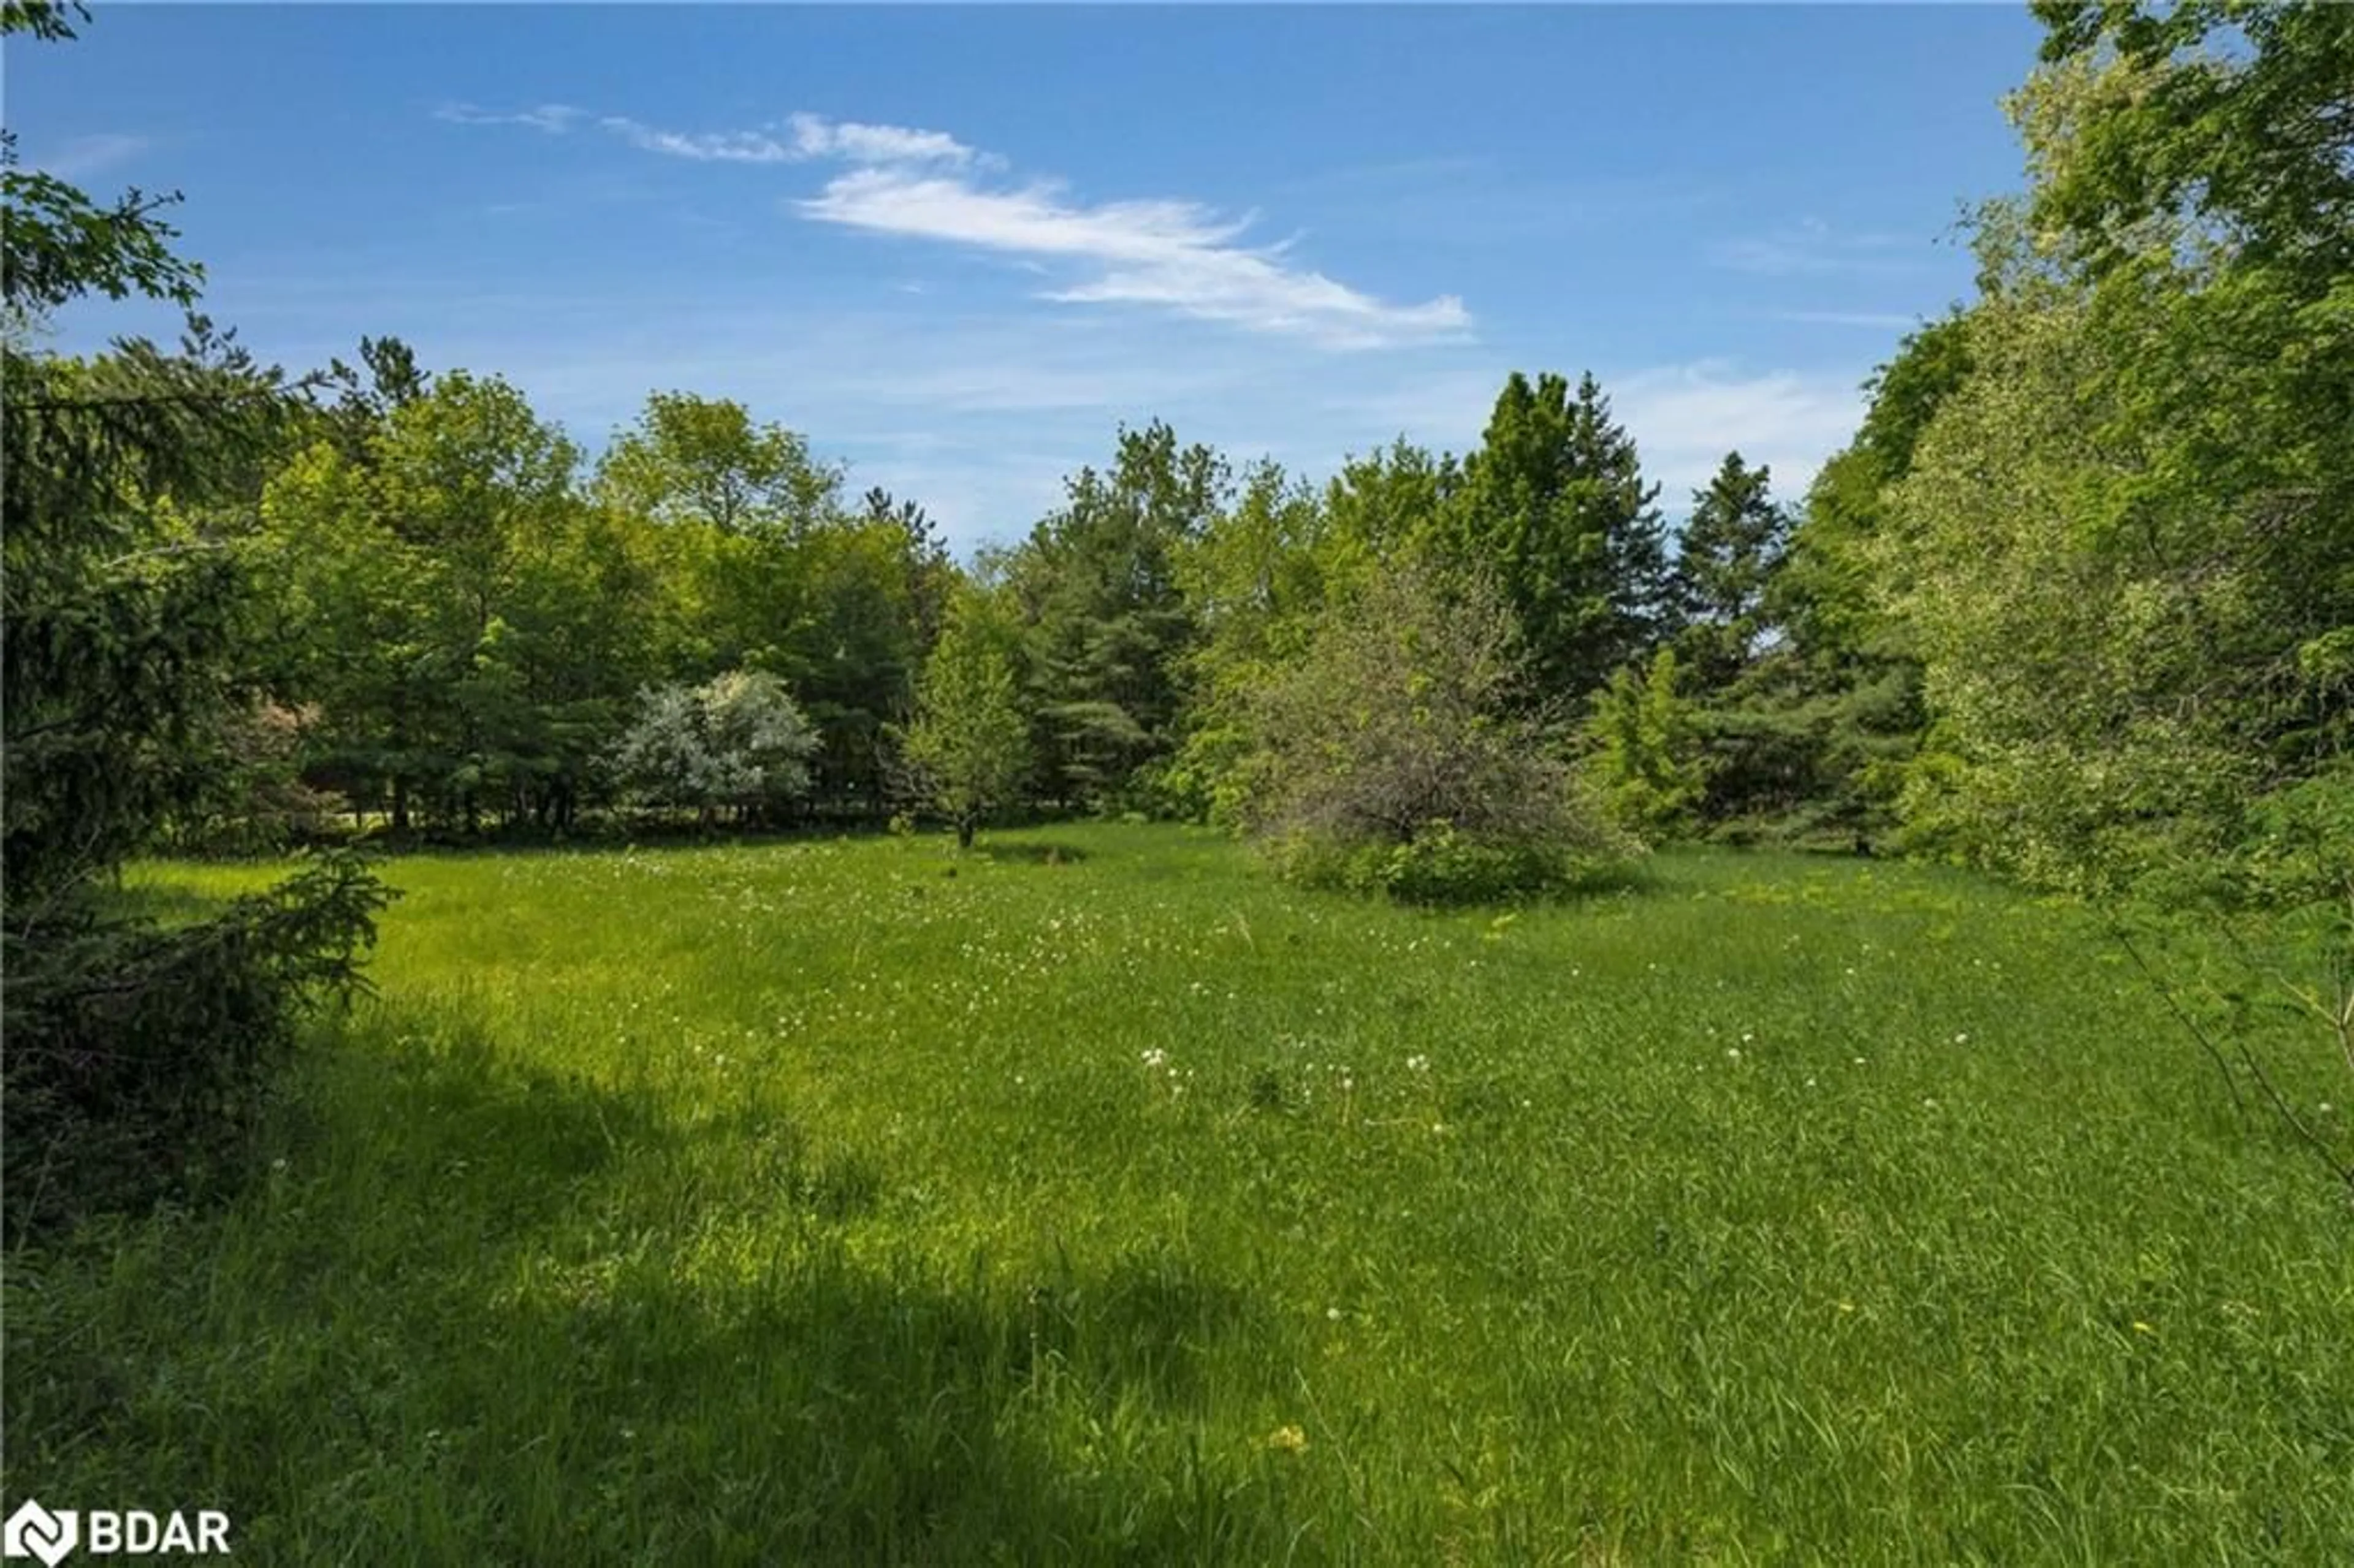 Fenced yard for PART 1 - 712 Mt St Louis Rd, Oro-Medonte Ontario L0L 1V0